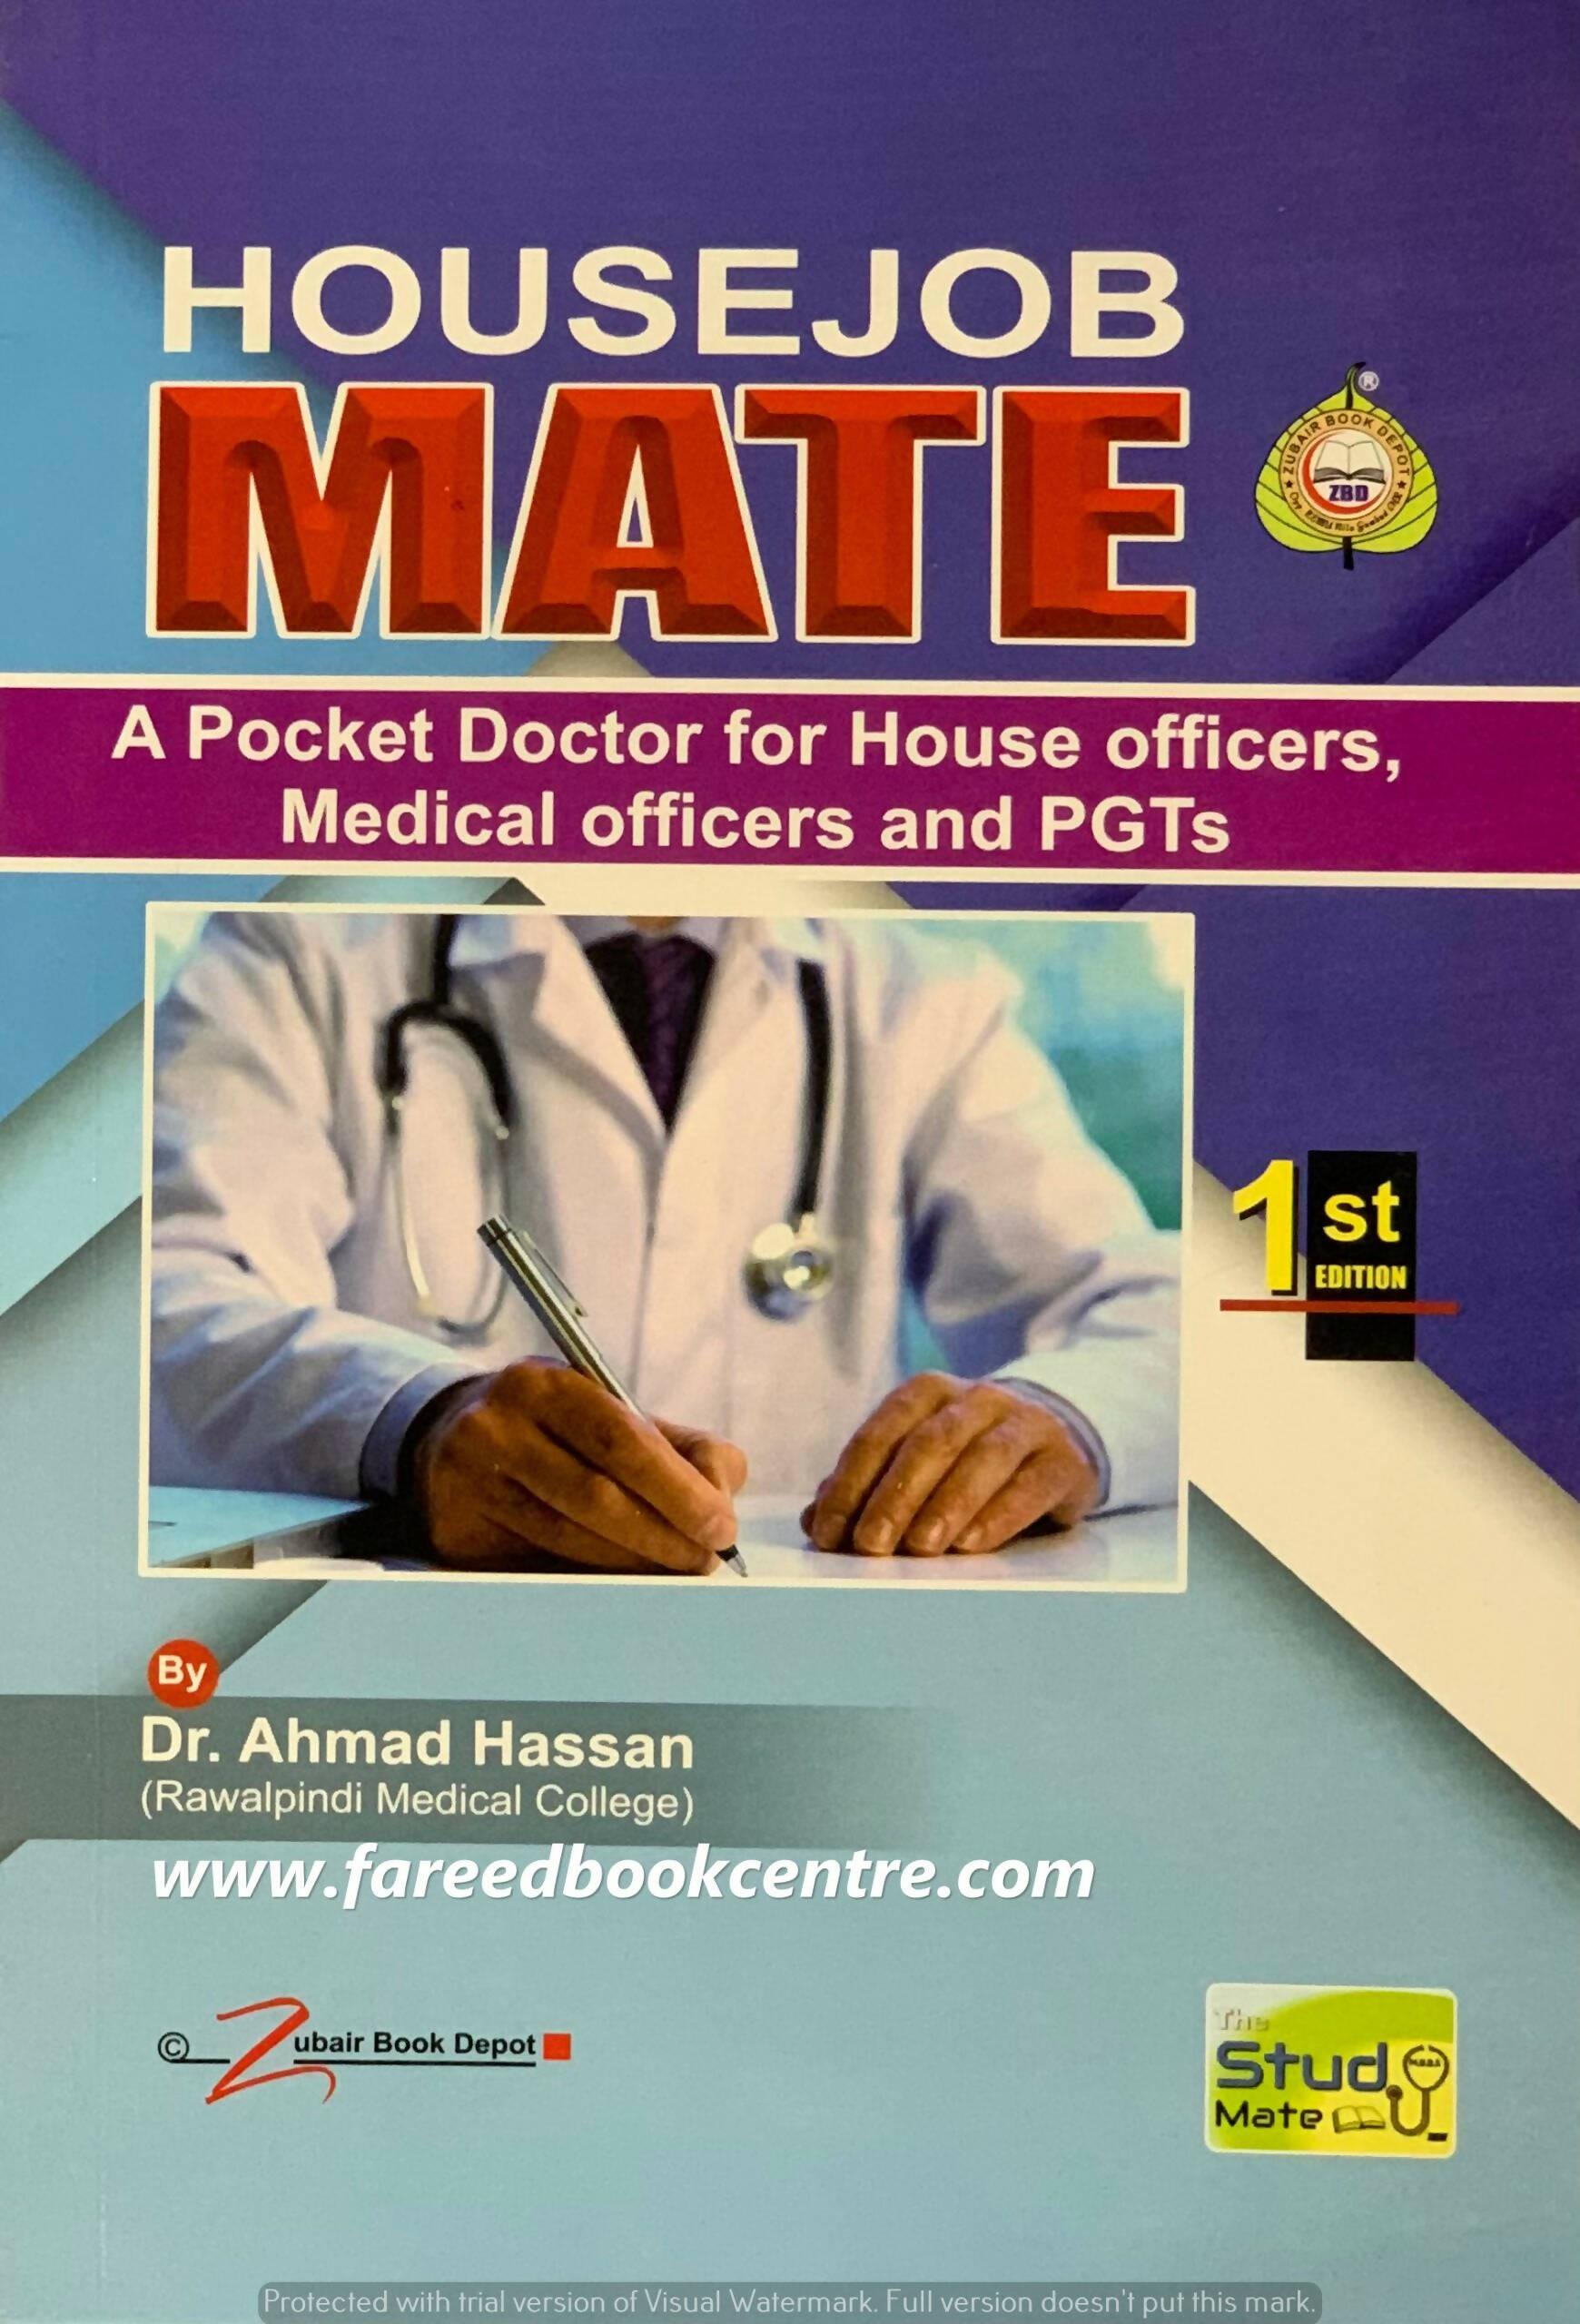 House Job Mate By Dr Ahmad Hassan - ValueBox